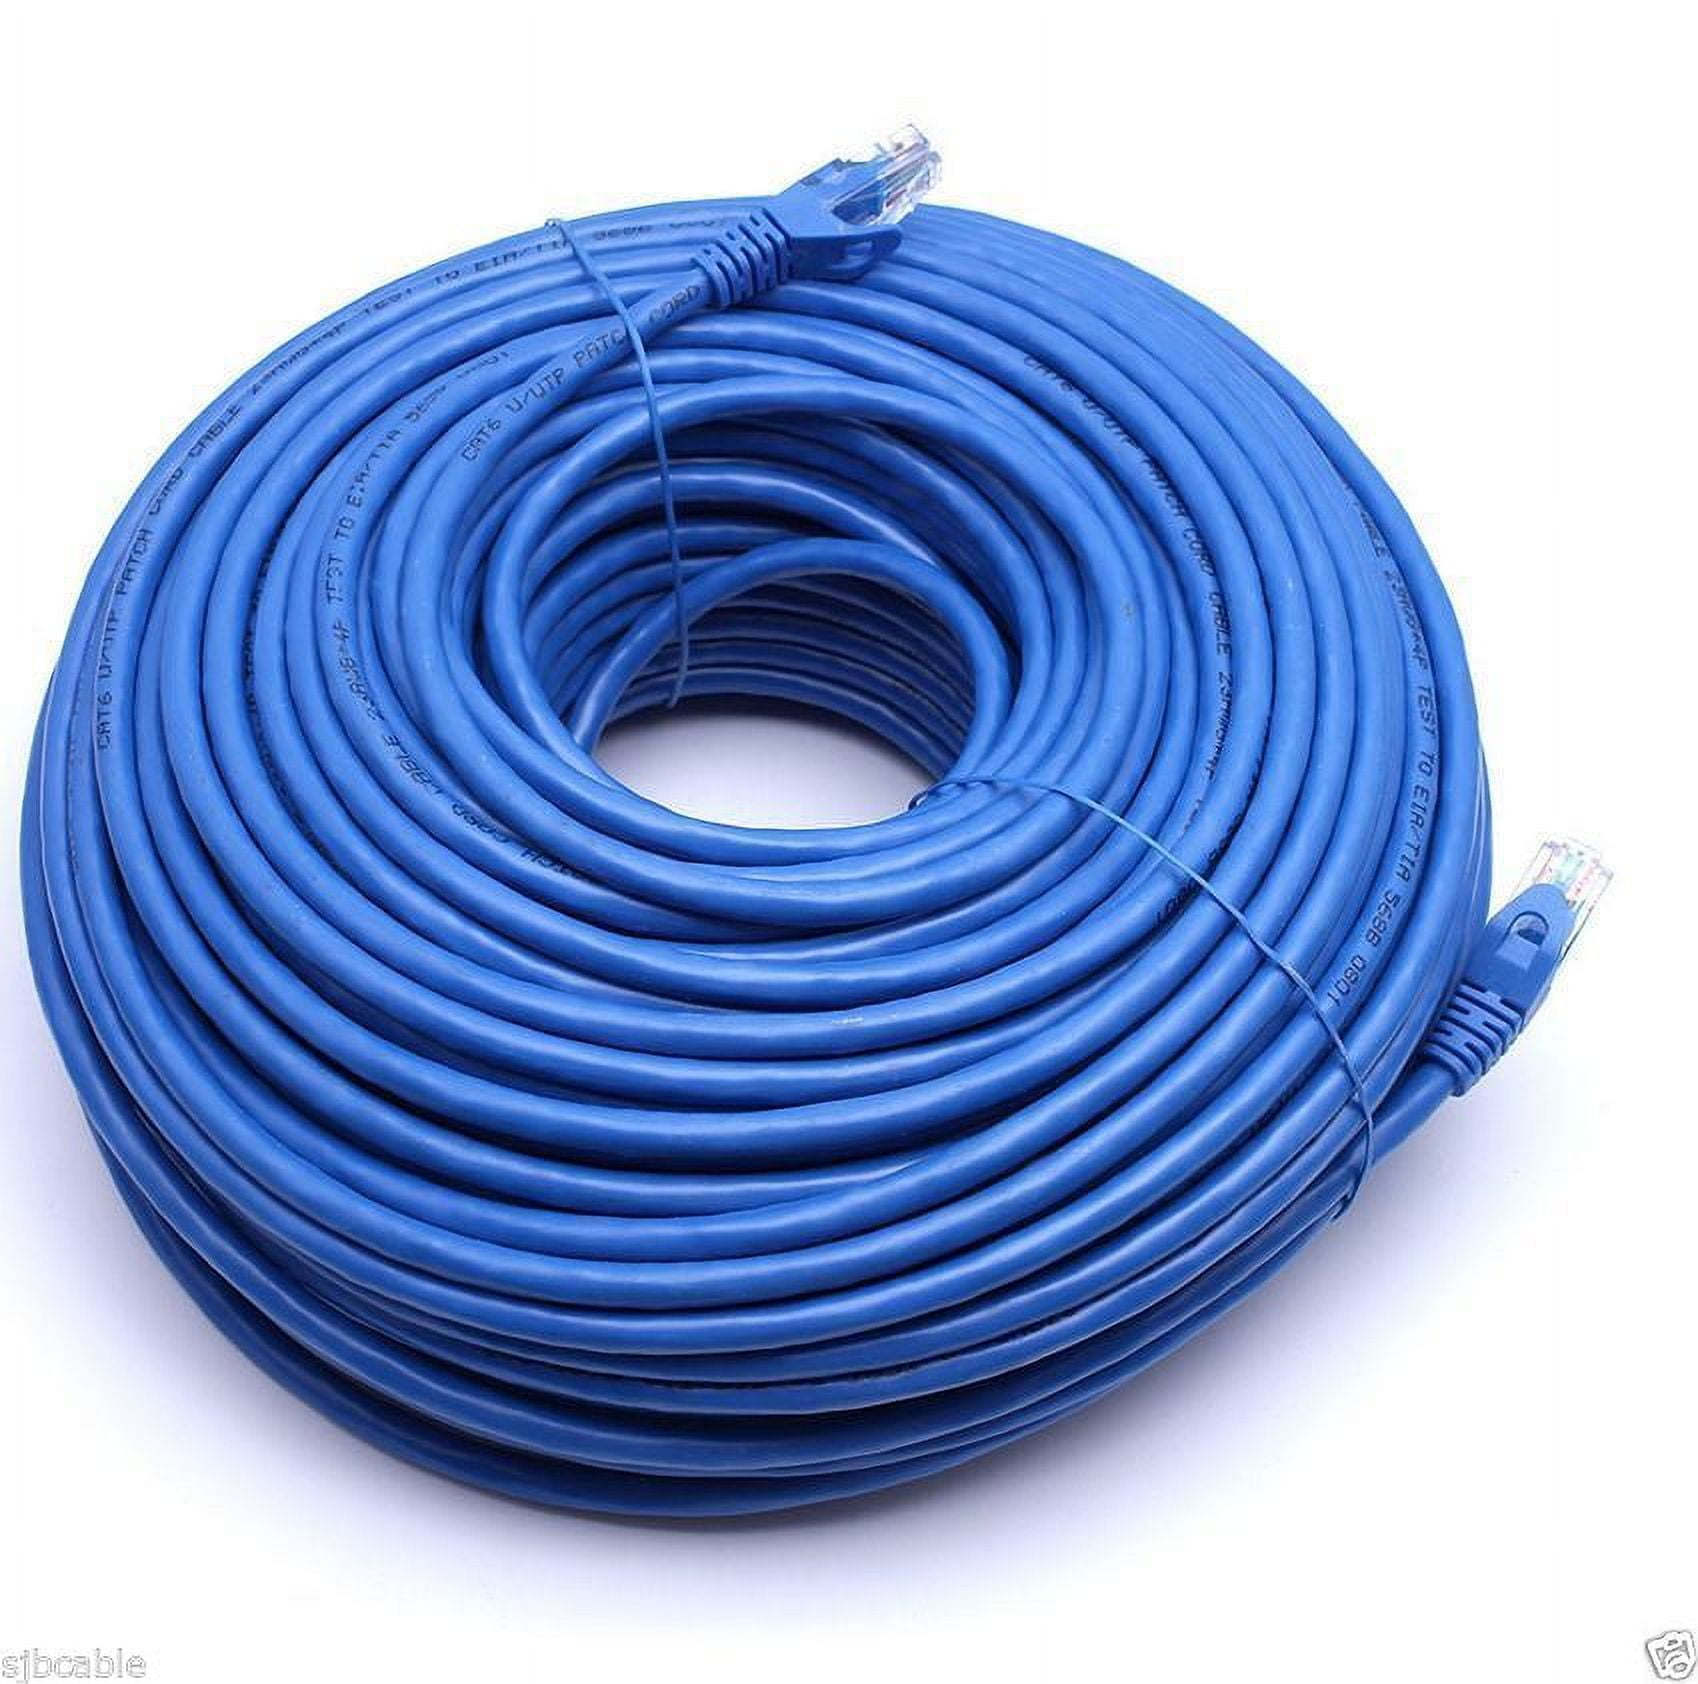 CableVantage RJ45 Cat6 100FT 100 ft Ethernet LAN Network Cable for PS Xbox  PC Internet Router blue 4 Solid UTP 